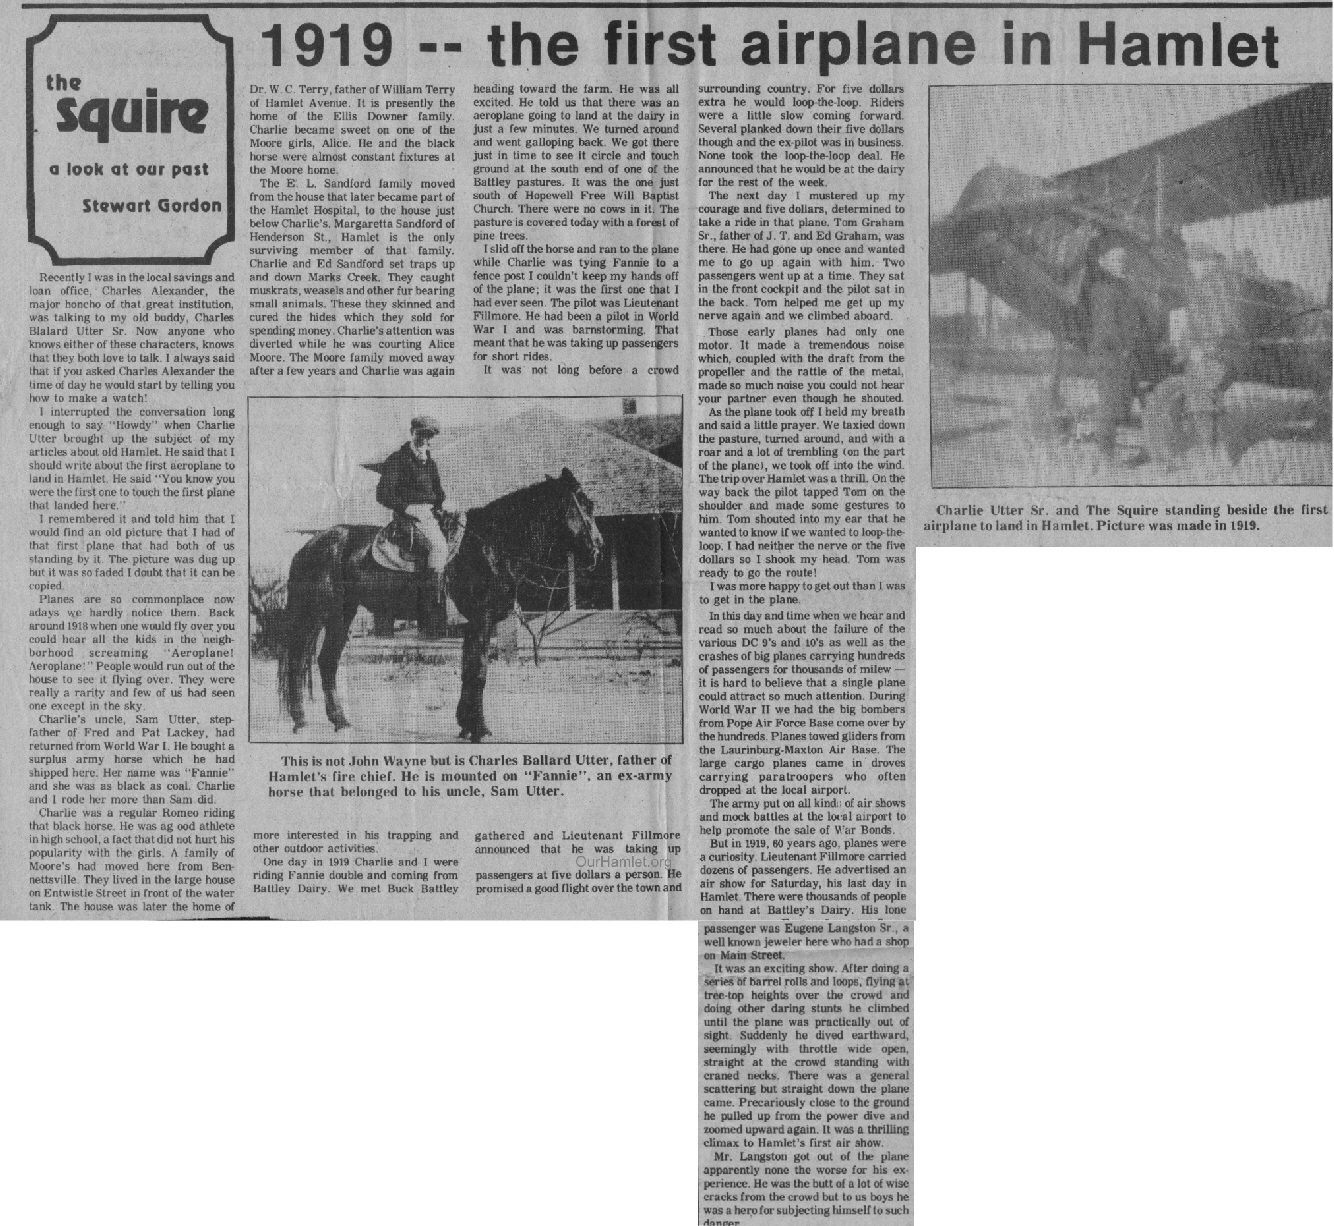 The Squire - 1919 First Airplane in Hamlet OH